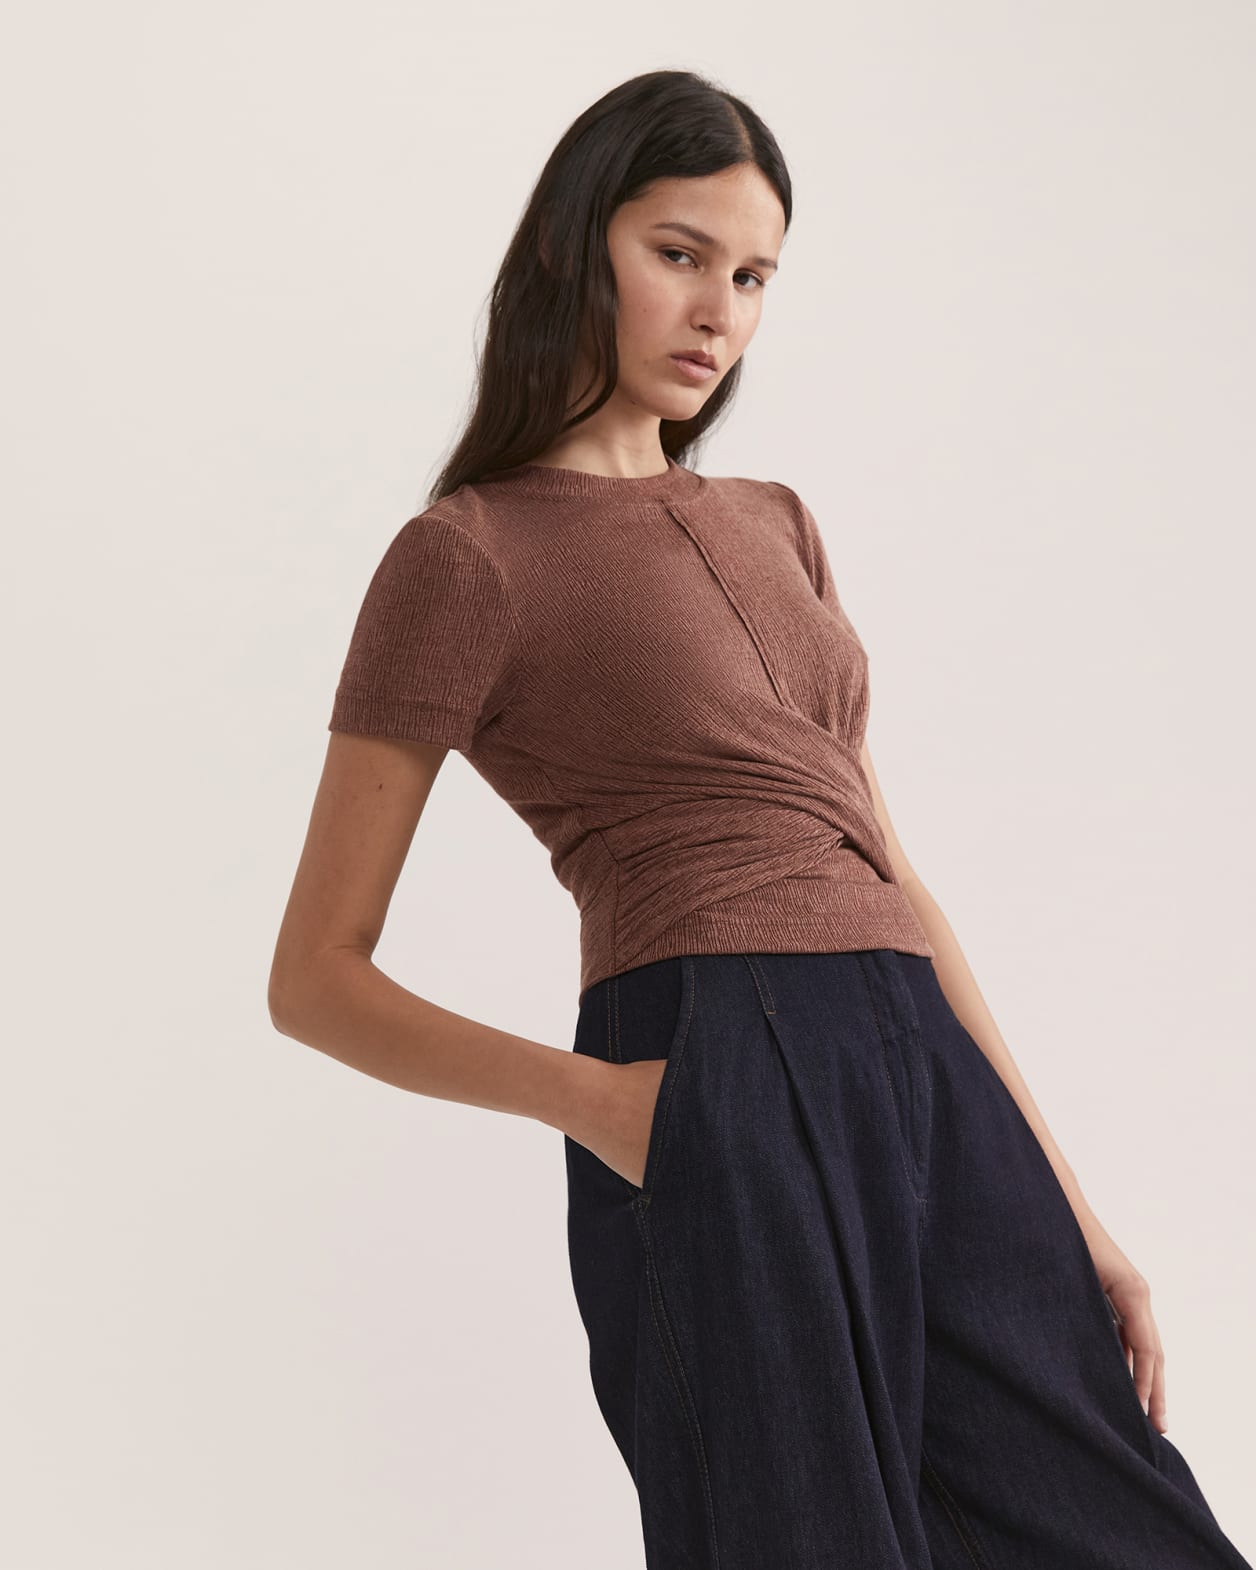 Xanthe Twist Front Top in MAHOGANY